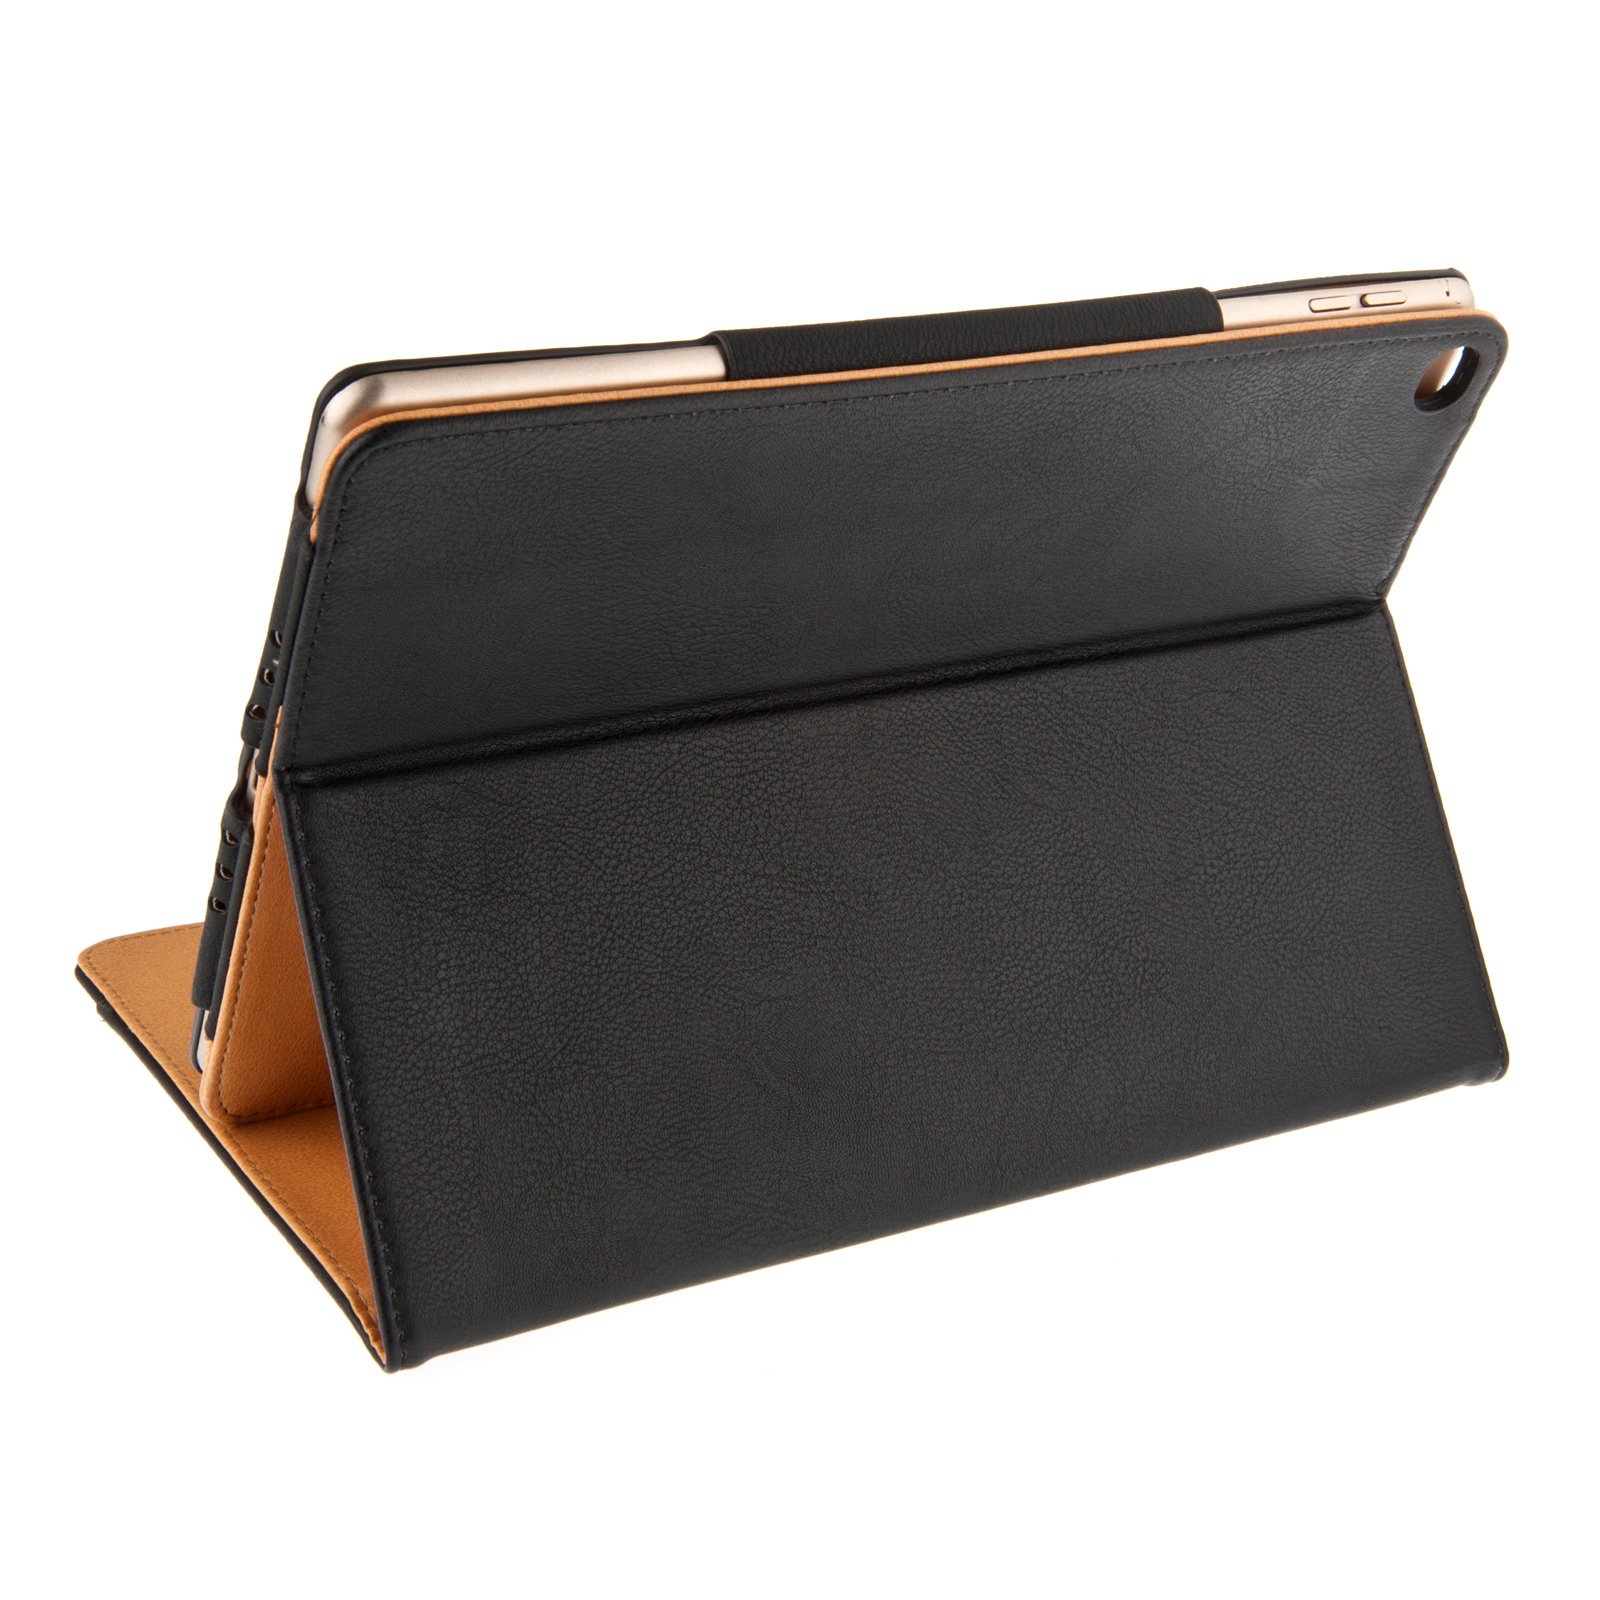 YouSave iPad Air 2 PU Leather Magnetic Closing Stand Cover – Black with Tan Lining 